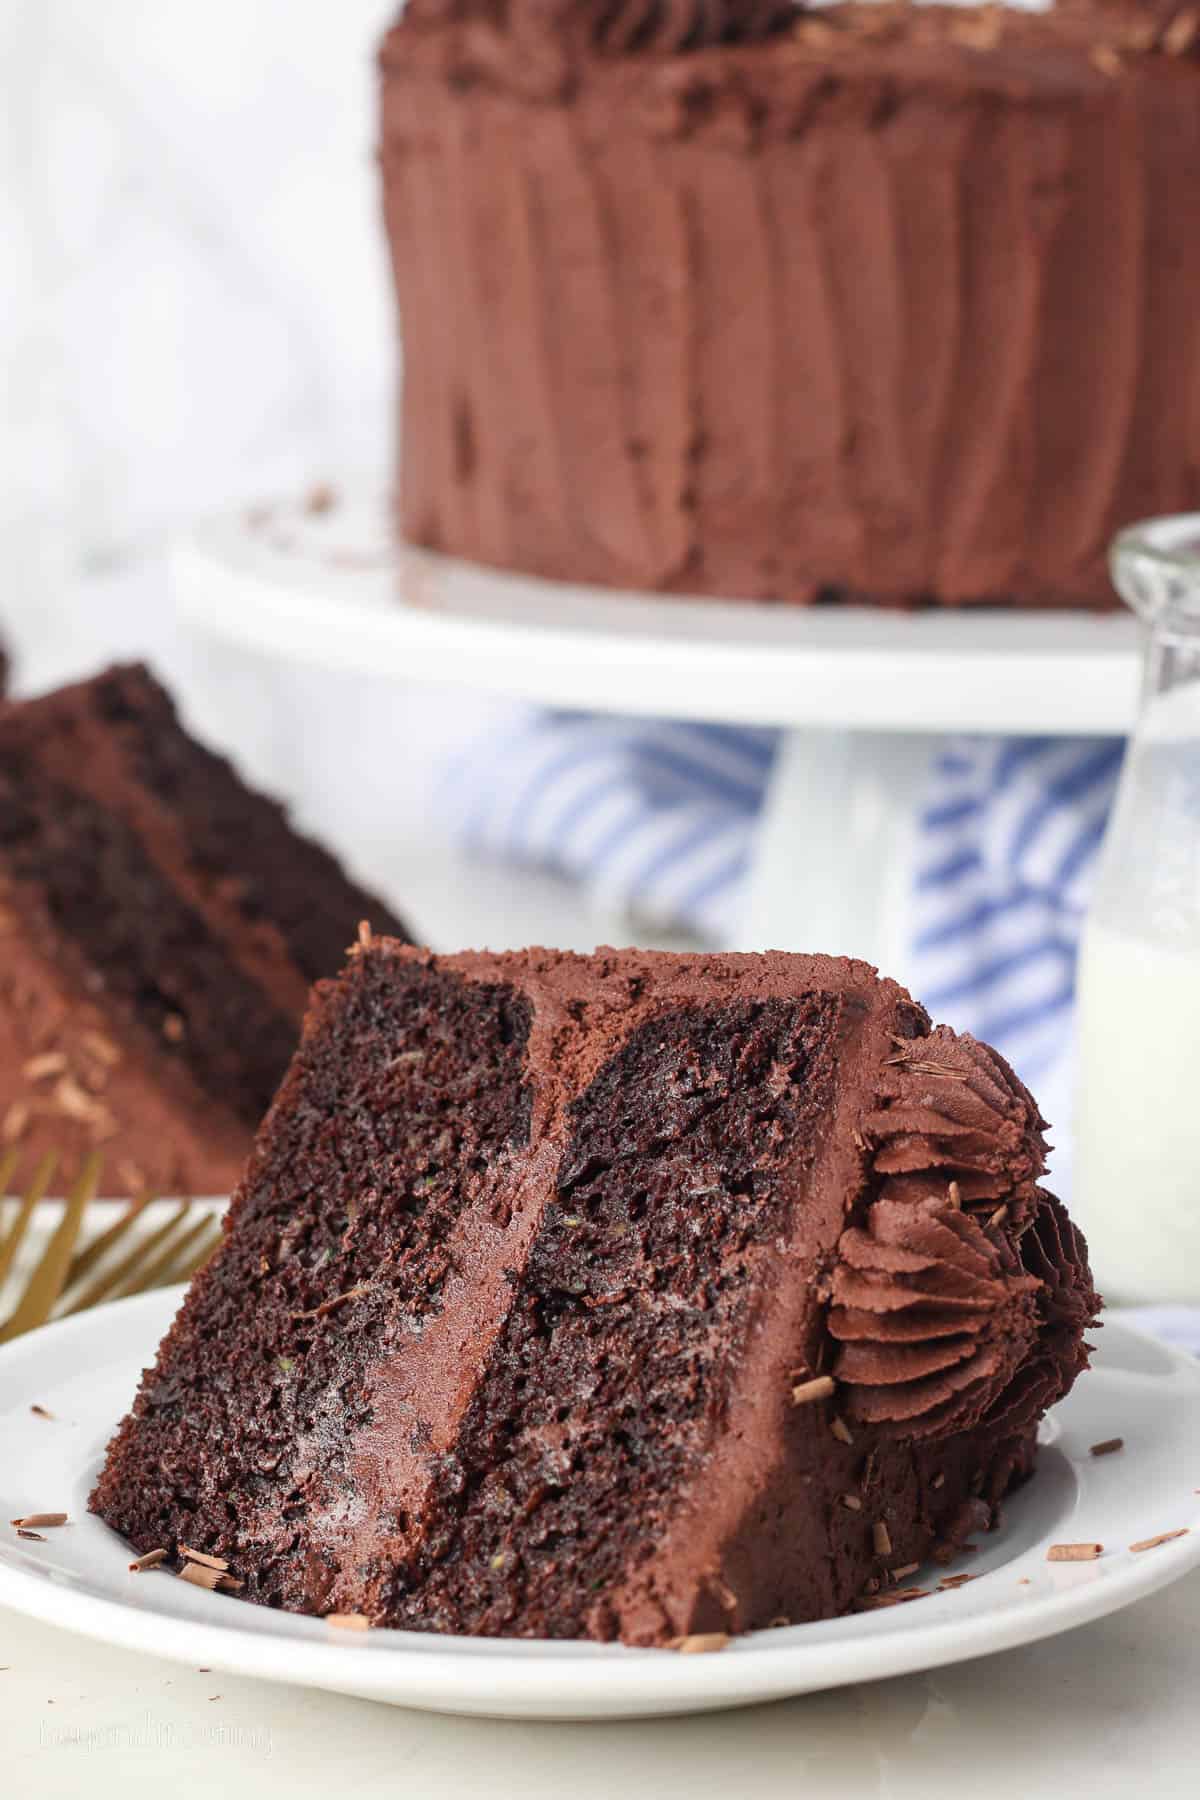 A slice of frosted chocolate zucchini cake laying on a plate, with the rest of the cake on a cake stand in the background.